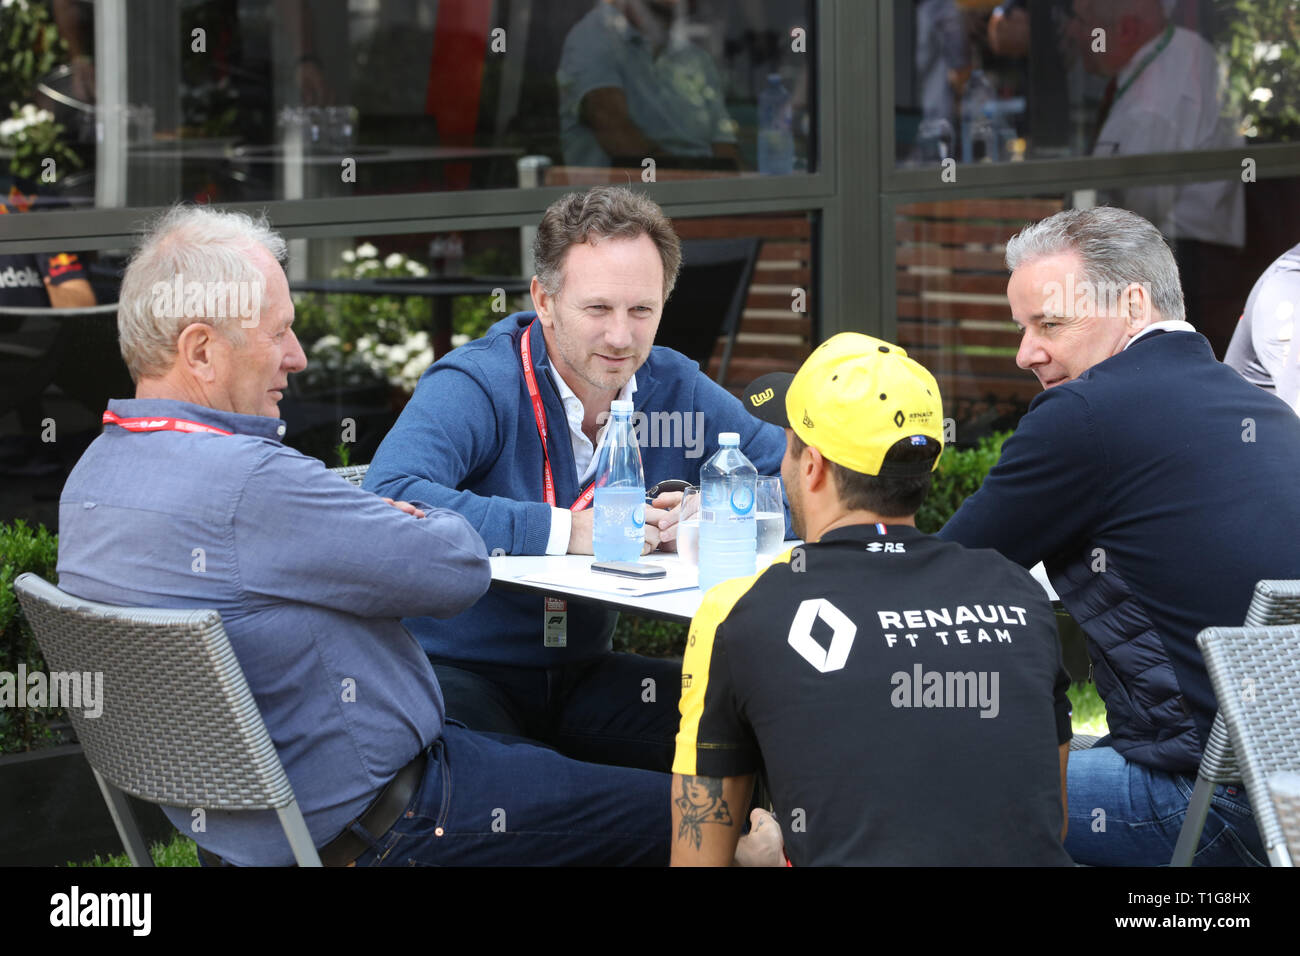 MELBOURNE, AUSTRALIA - MARCH 14: Daniel RICCIARDO of Renault Sport F1 Team talks to Christian HORNER and Helmut Marko of Red Bull Racing on day 1 of t Stock Photo